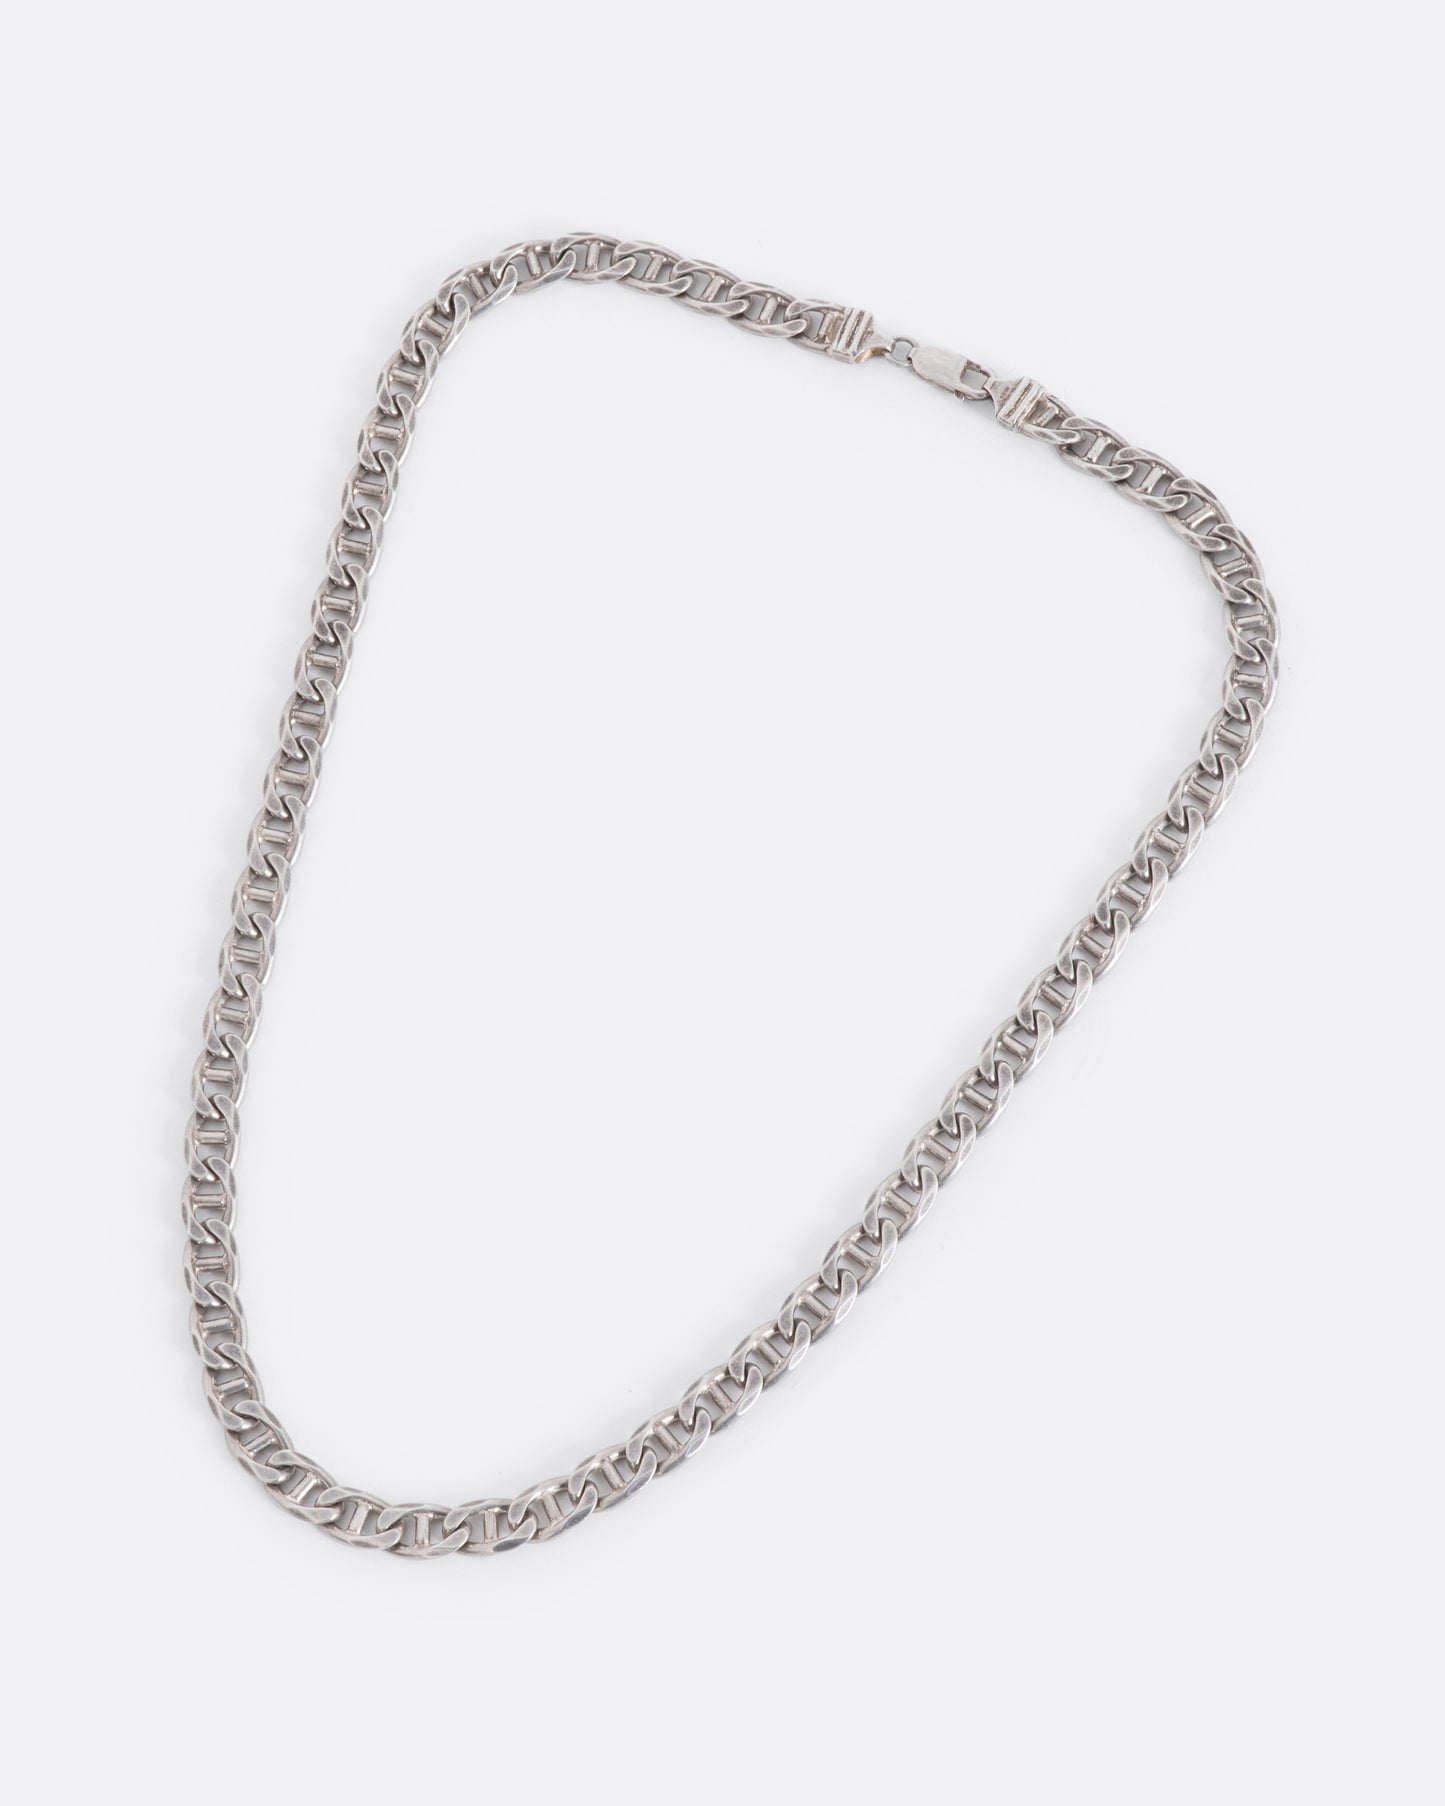 A vintage sterling silver flat mariner chain necklace.